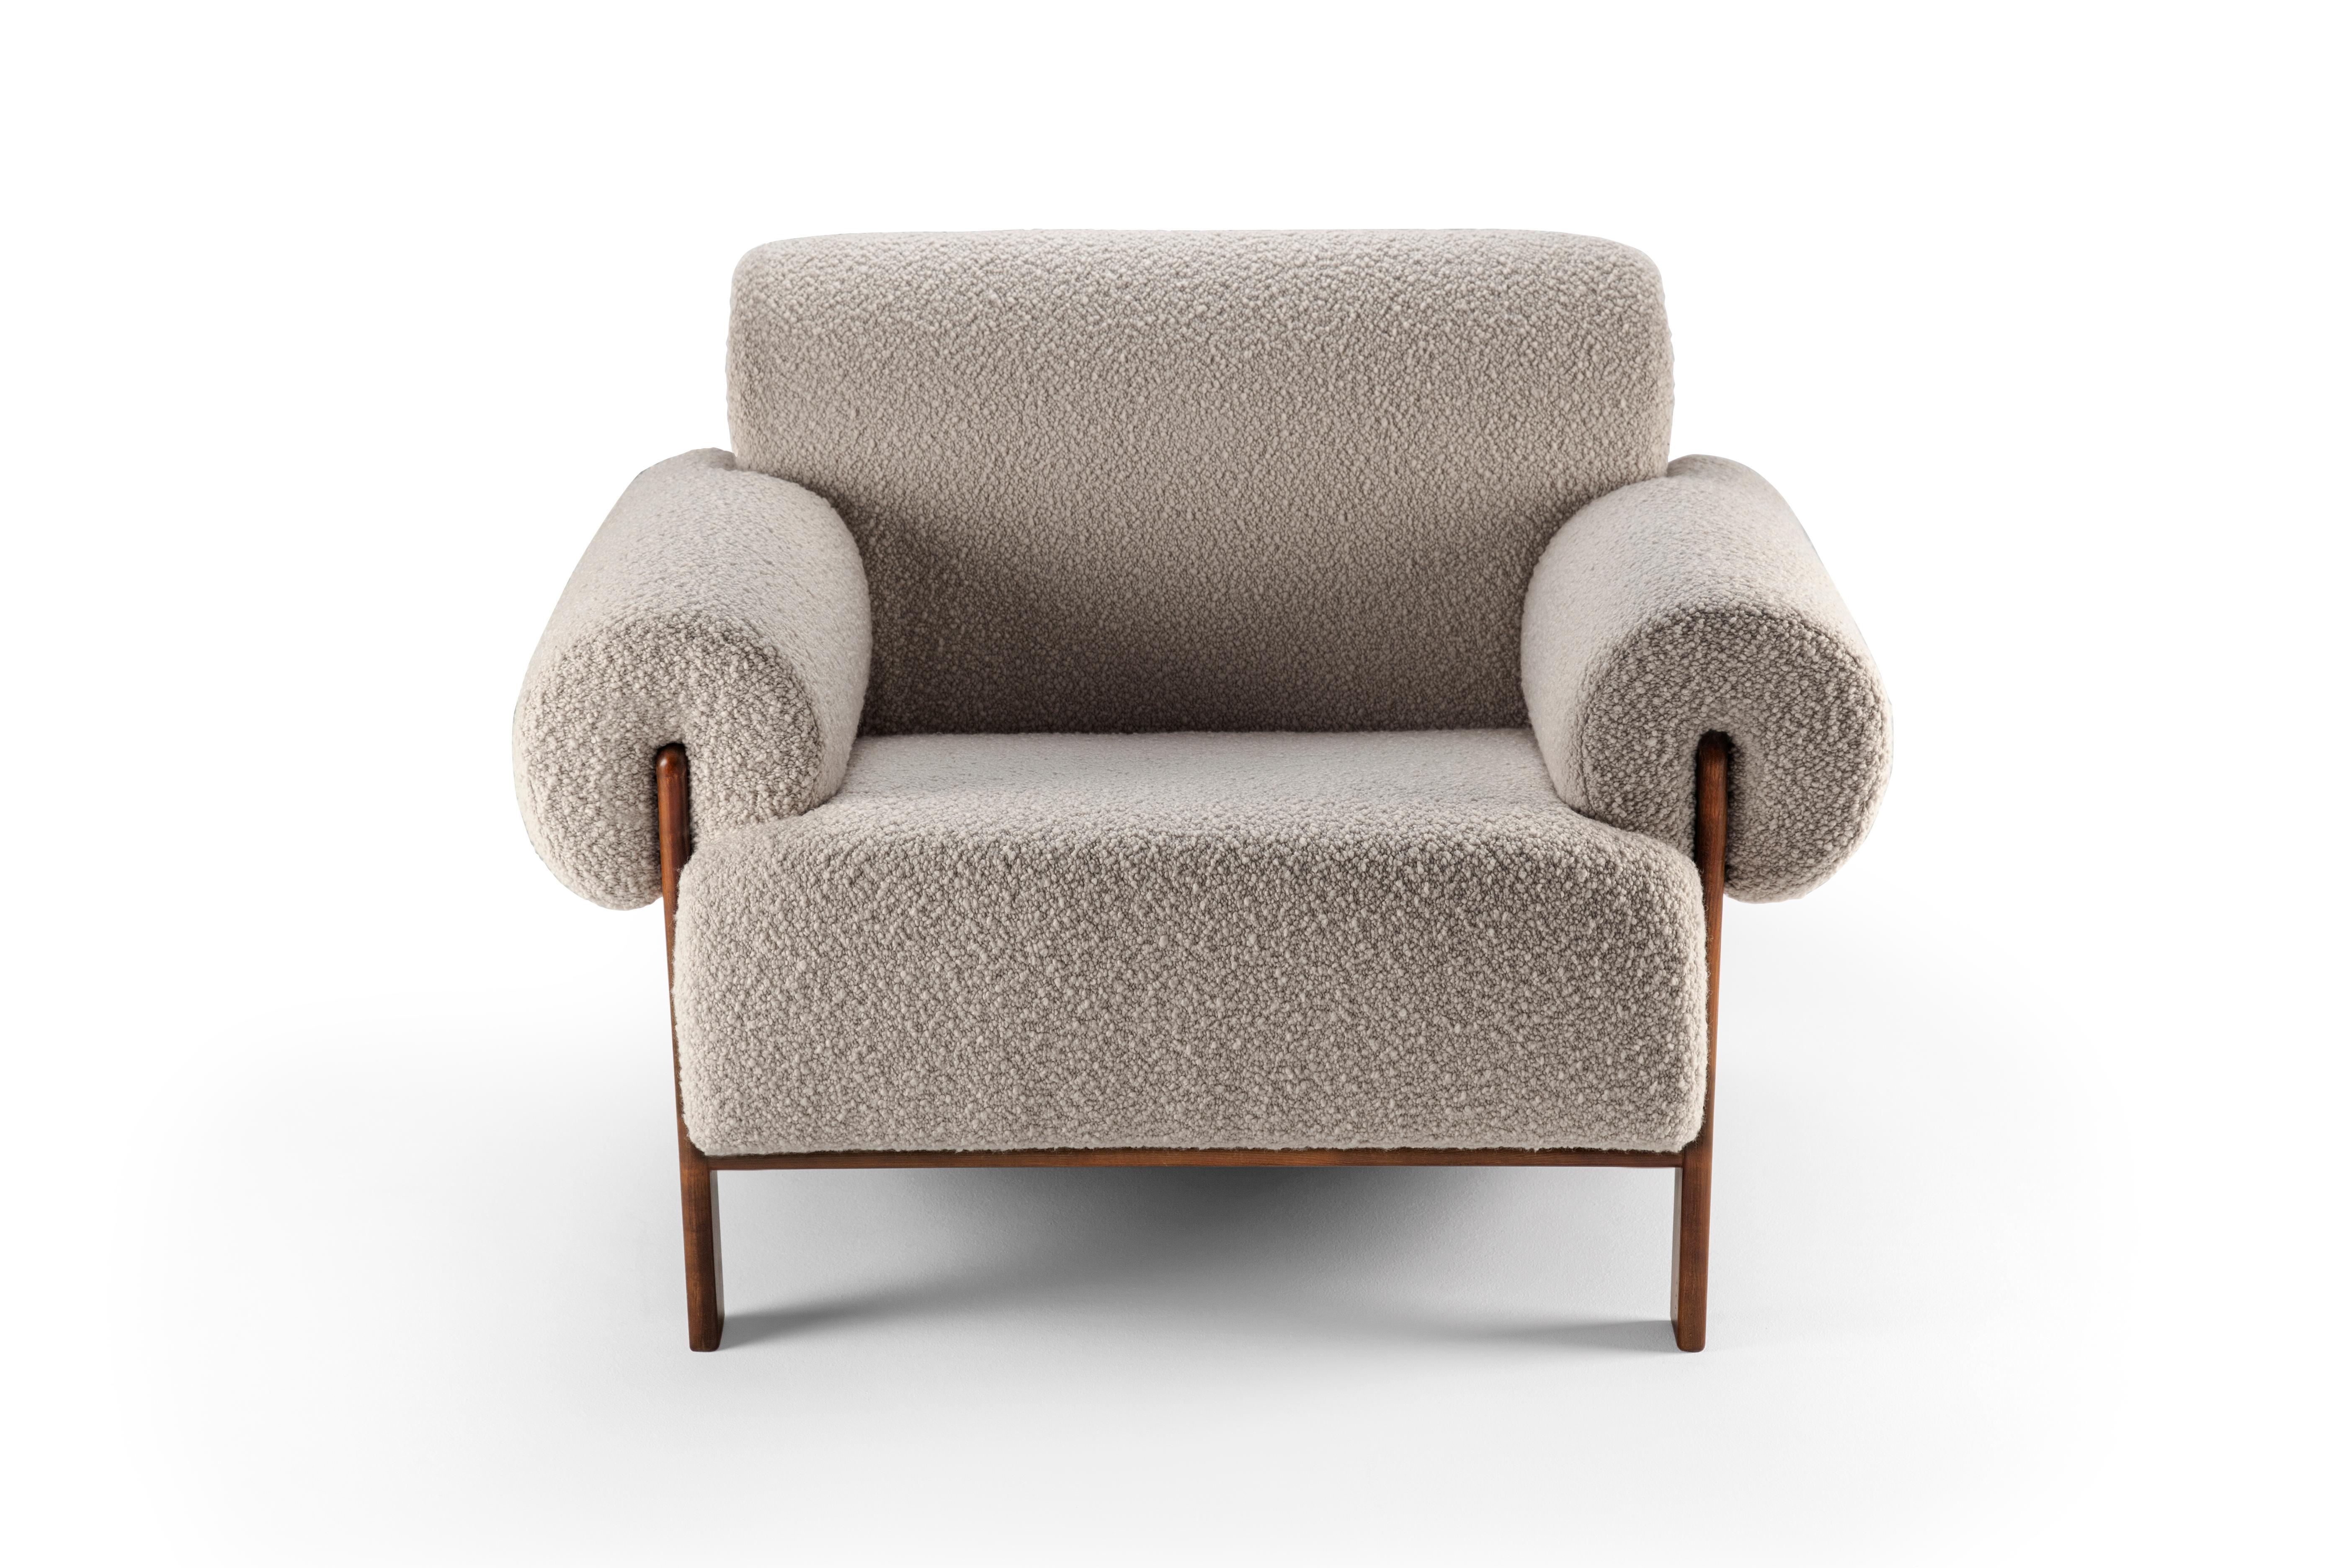 Underpinned by a minimalist and sophistication aesthetic of clean lines.

DIMENSIONS
W 95CM  37.5”
D 85CM  33.5”
H 72CM 28”
SH 40 cm  15,7”

PRODUCT FEATURES
Structure in Solid Walnut wood. Upholstered in Zumirez Linen fabric.

PRODUCT